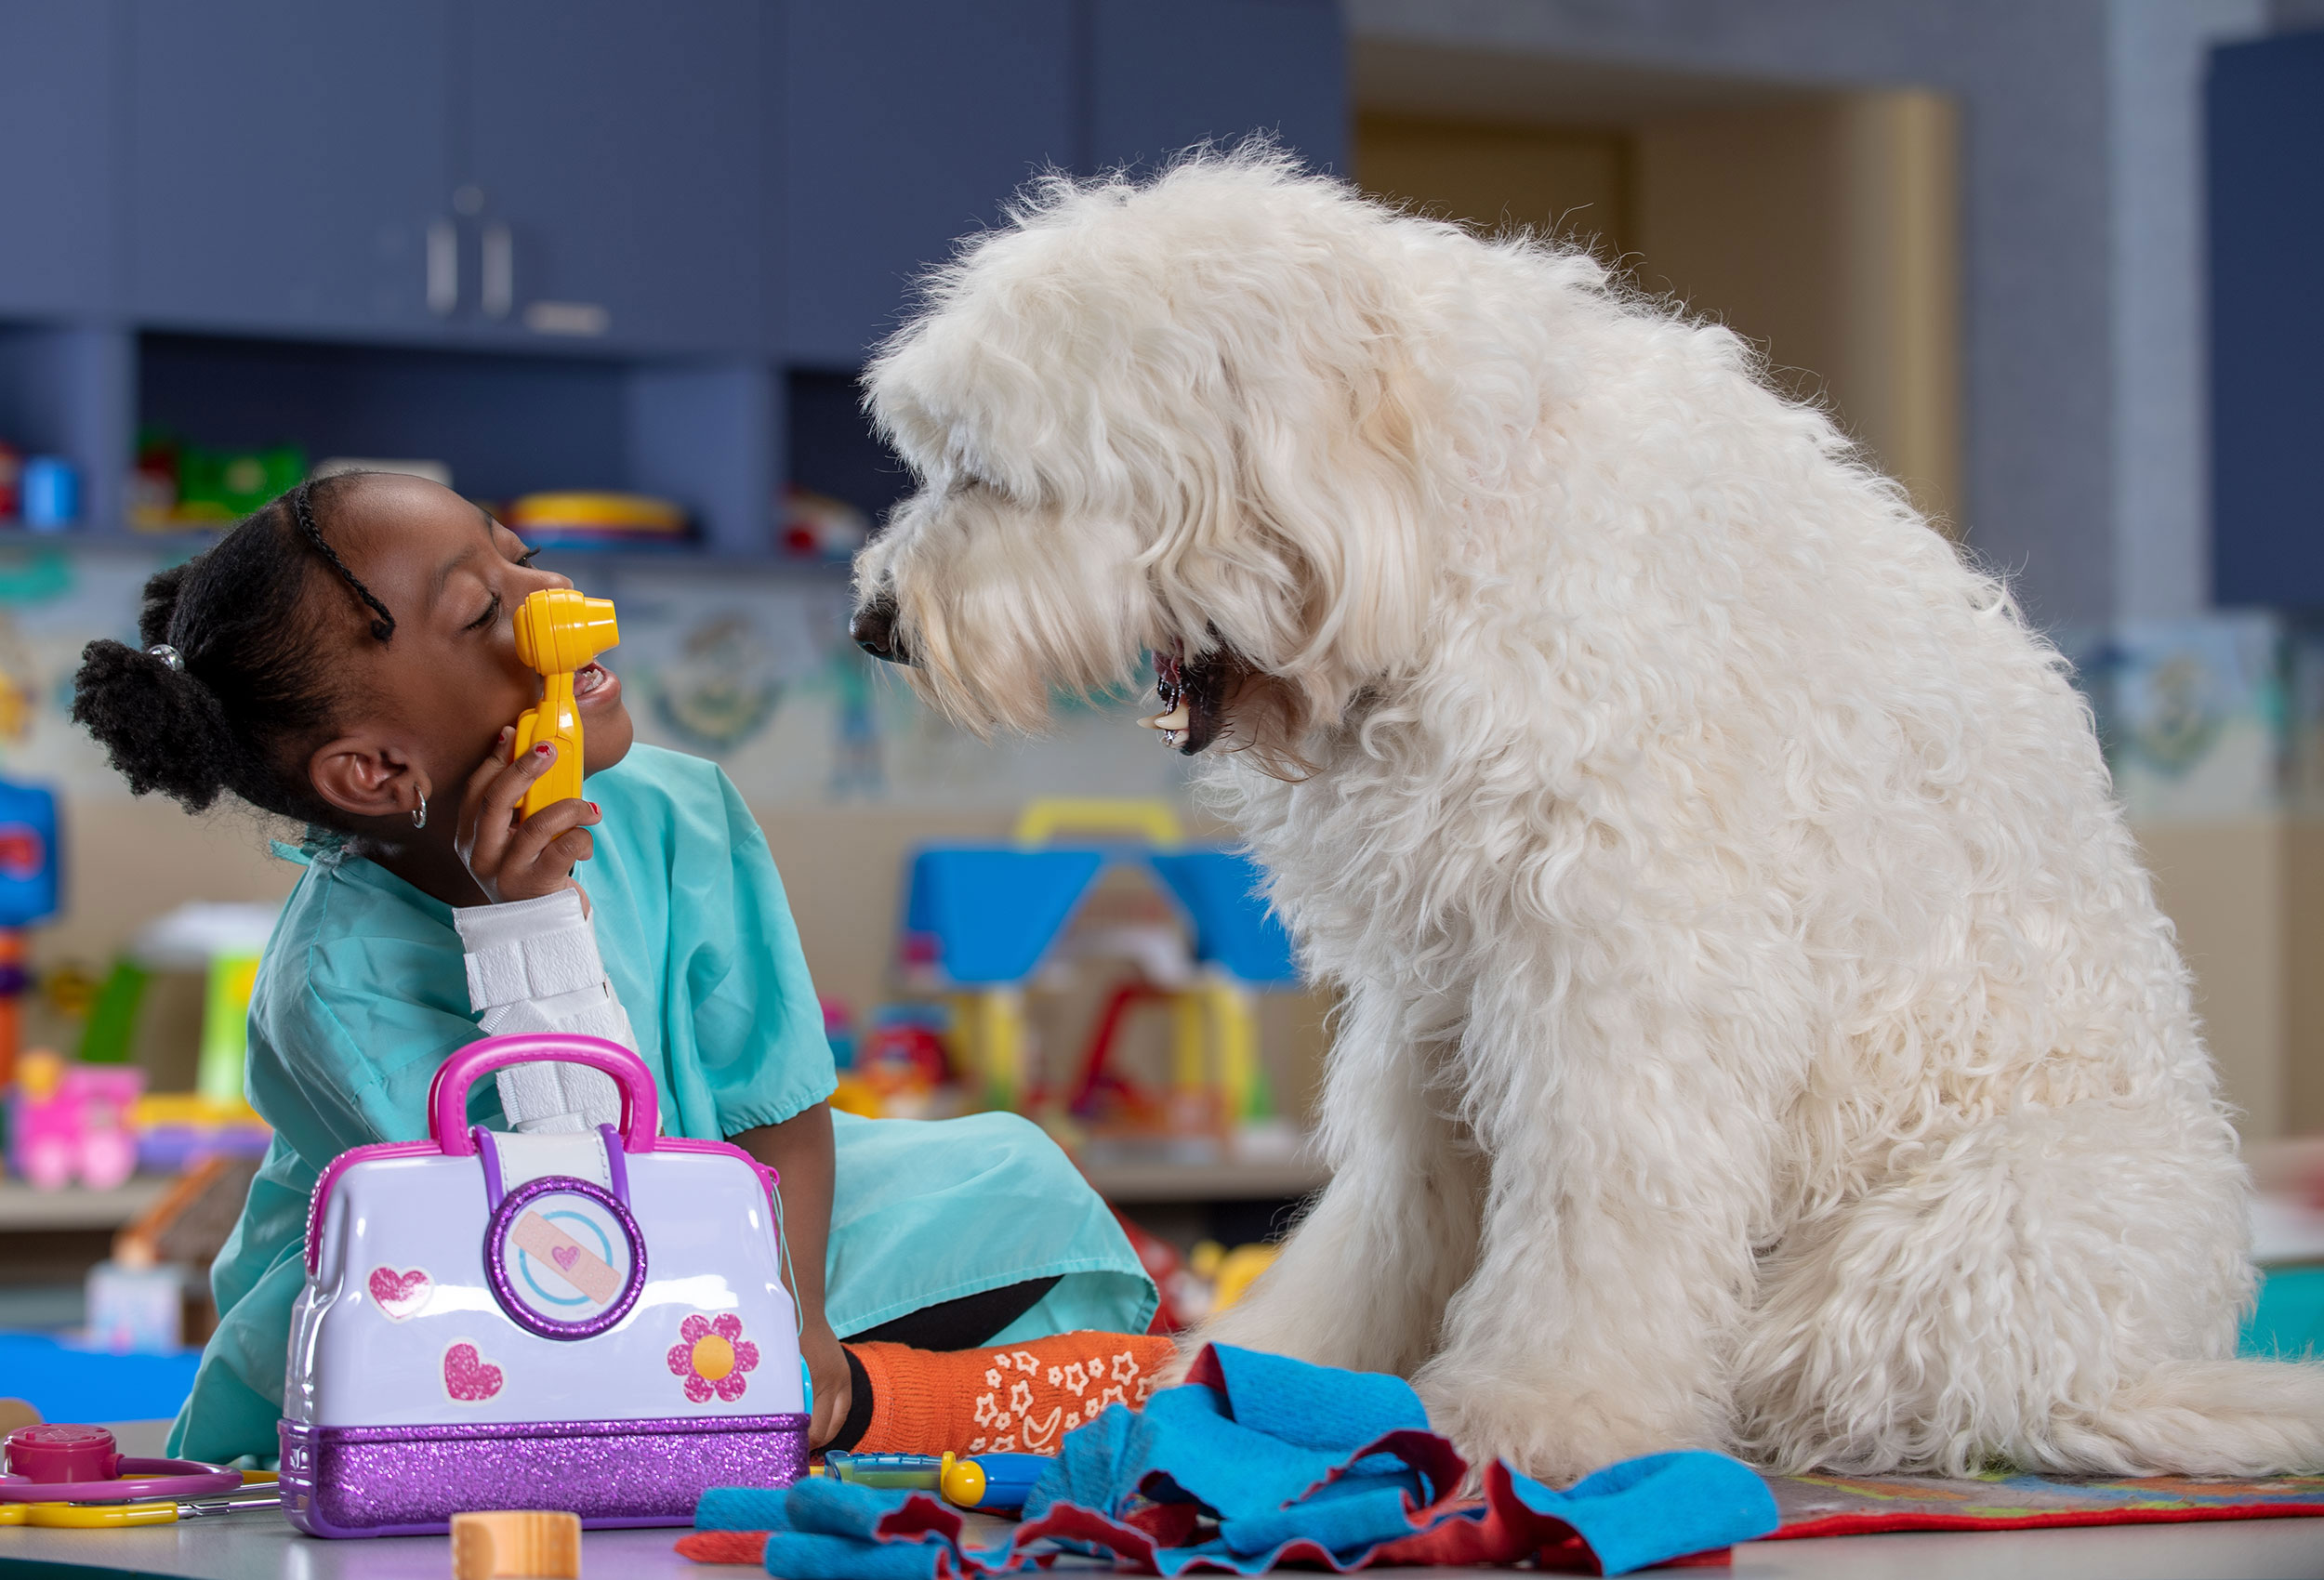 Little girl plays doctor with therapy dog Wally B Doodle  in pediatric playroom 